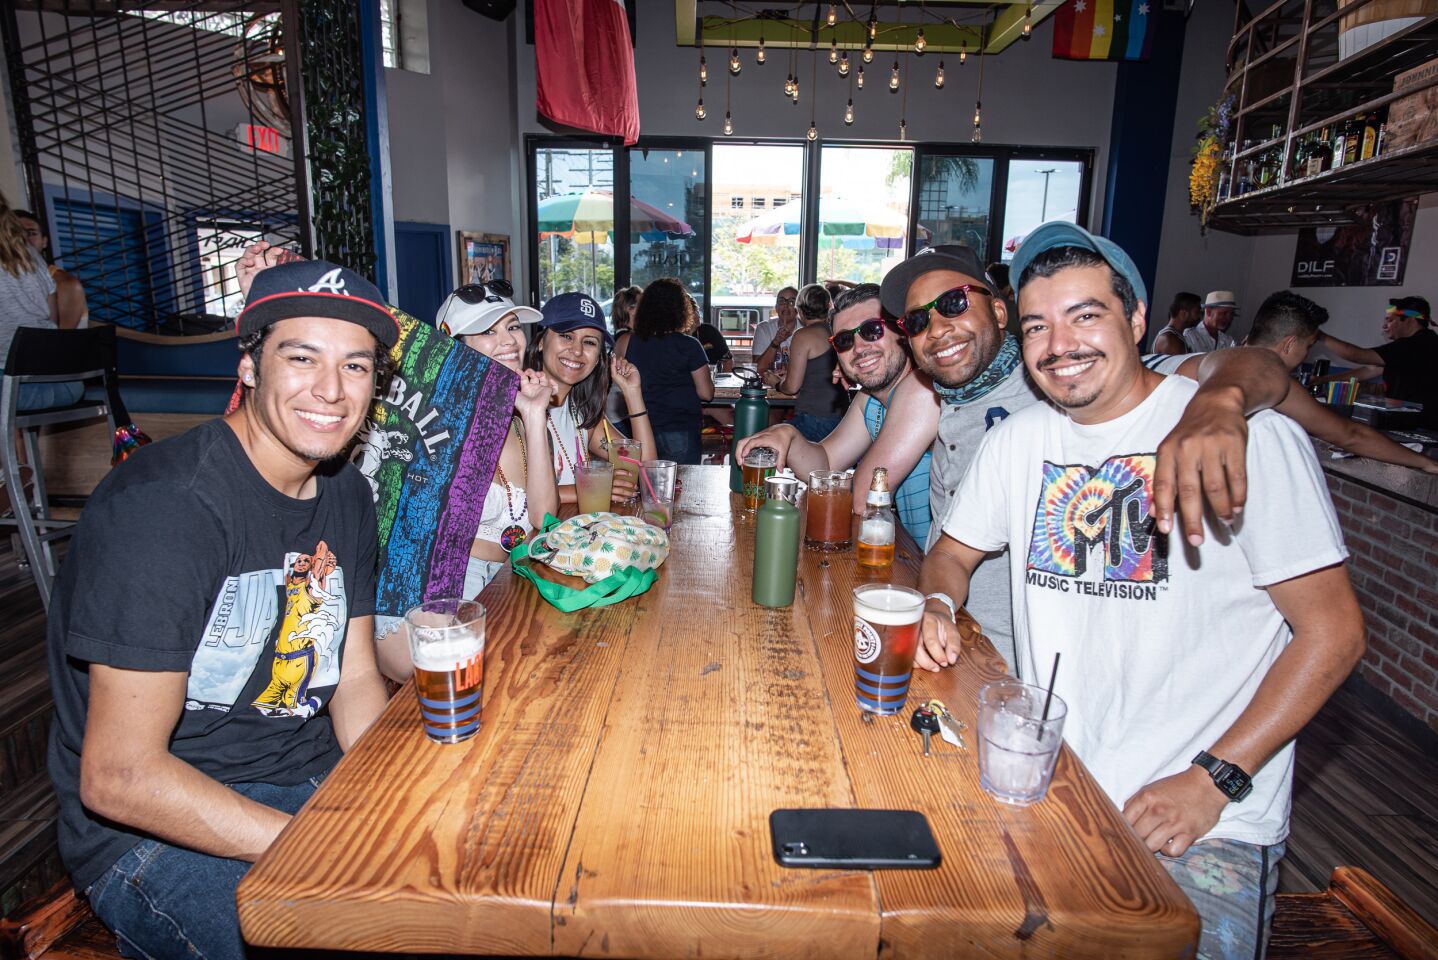 San Diego showed its colors and celebrated Pride at The Rail in Hillcrest on Saturday, July 17, 2021.